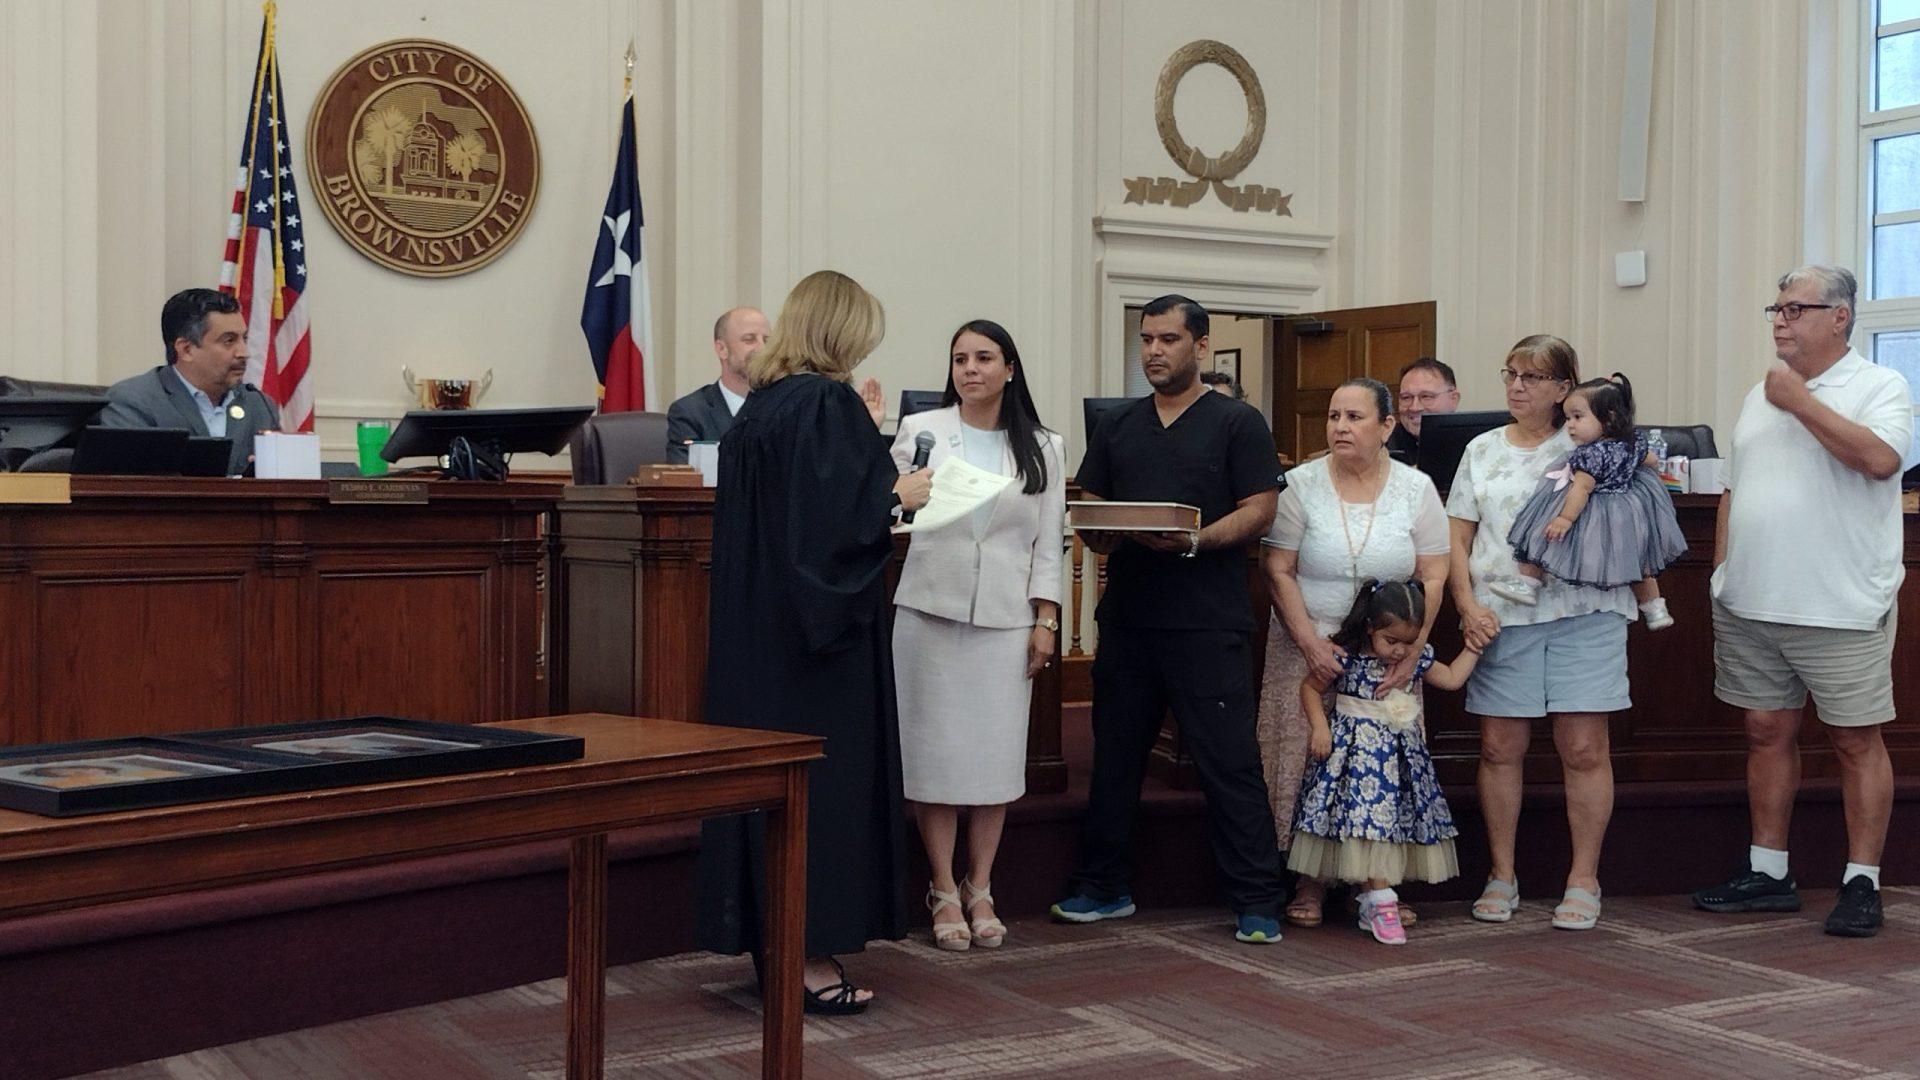 Brownsville’s newly elected mayor, commissioners take oath of office